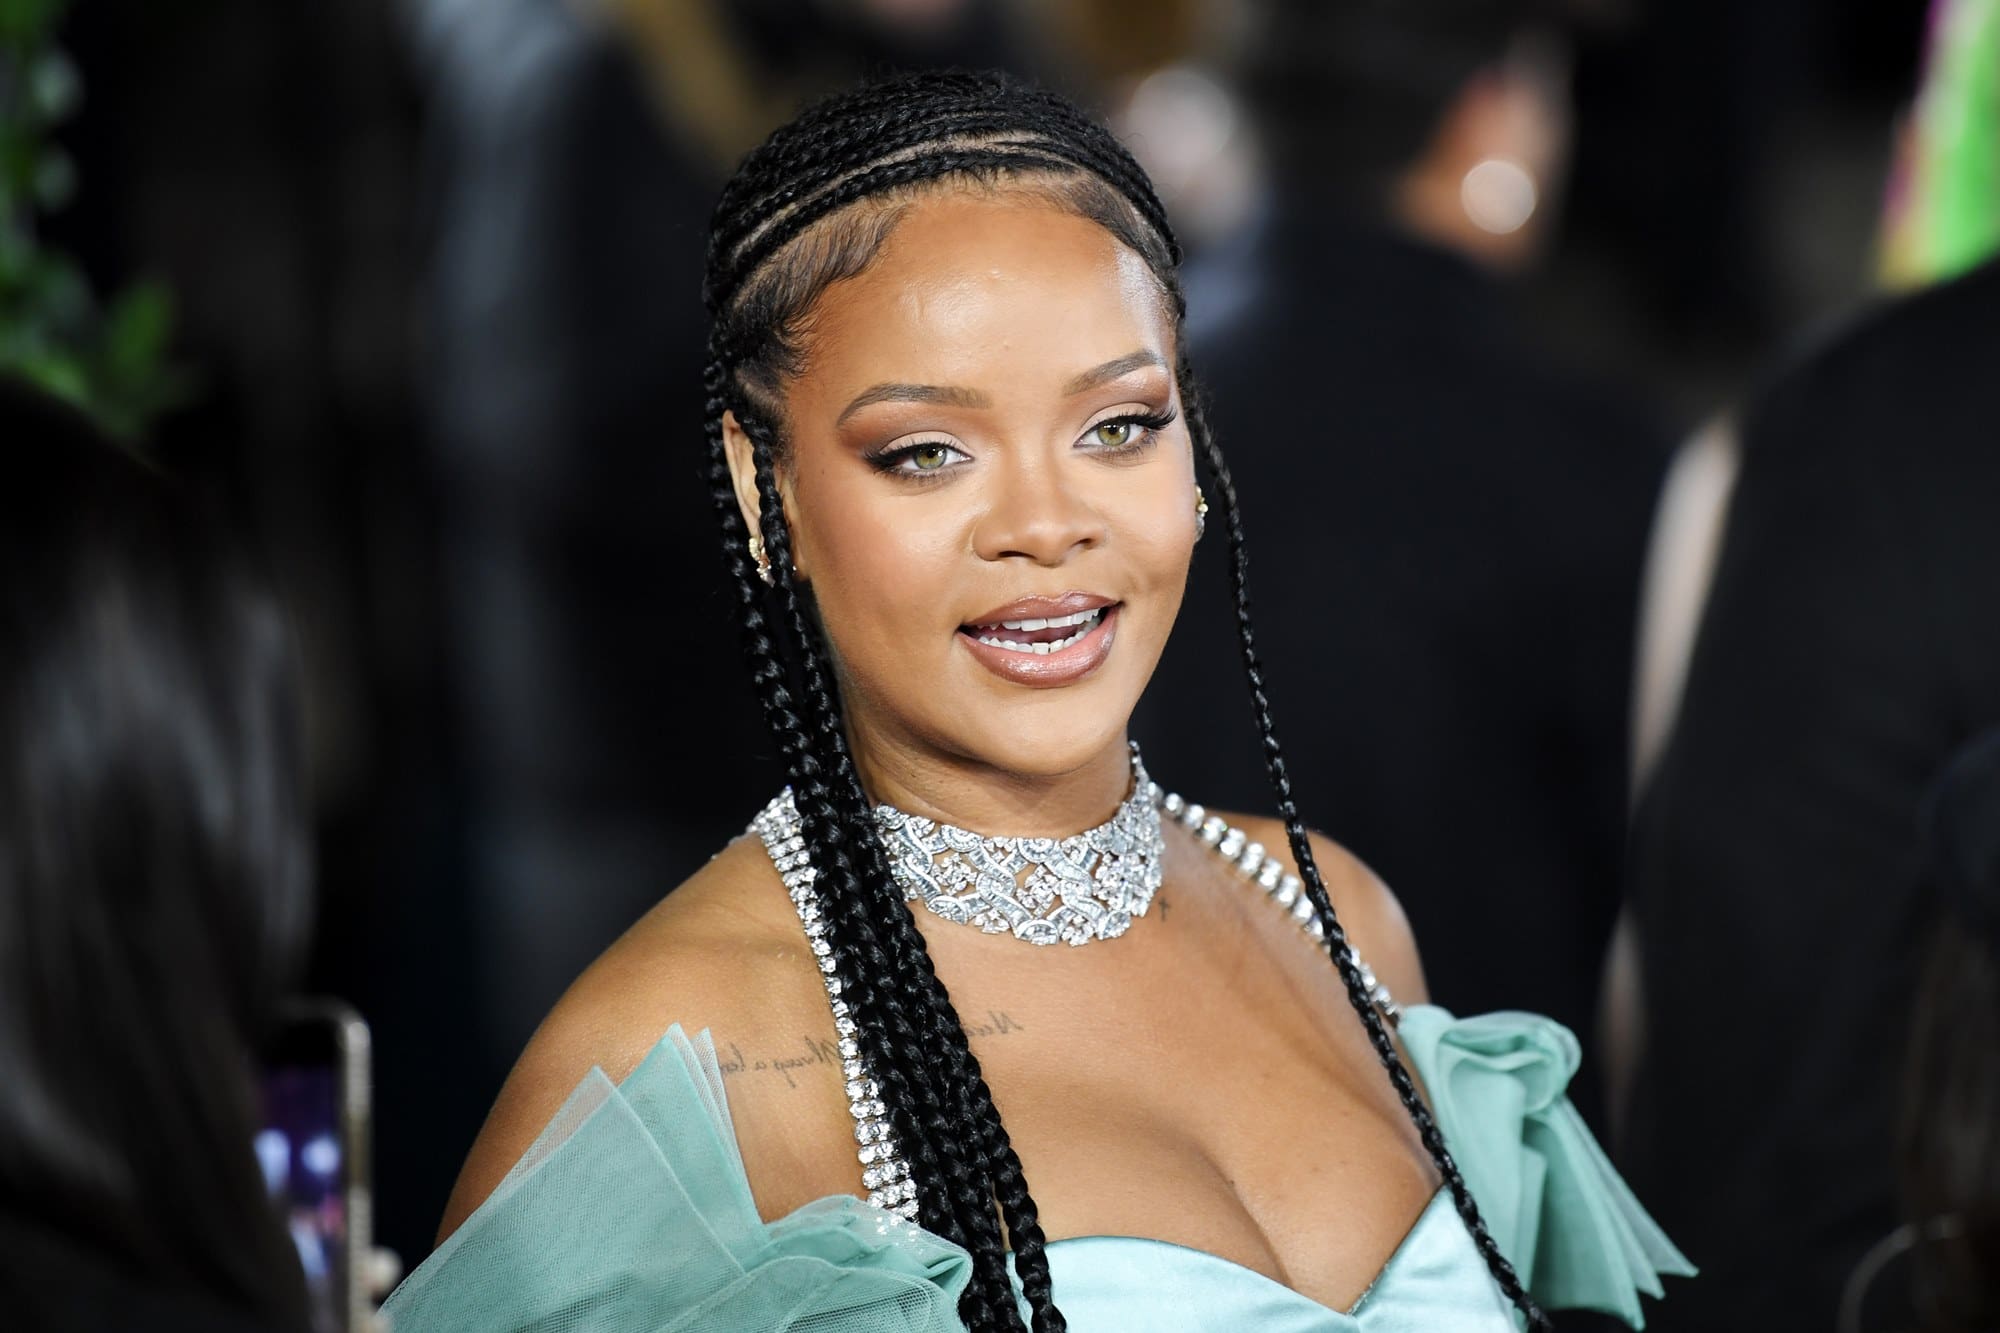 ”rihanna-drops-a-bombshell-about-where-she-will-be-in-her-life-by-the-age-of-42”